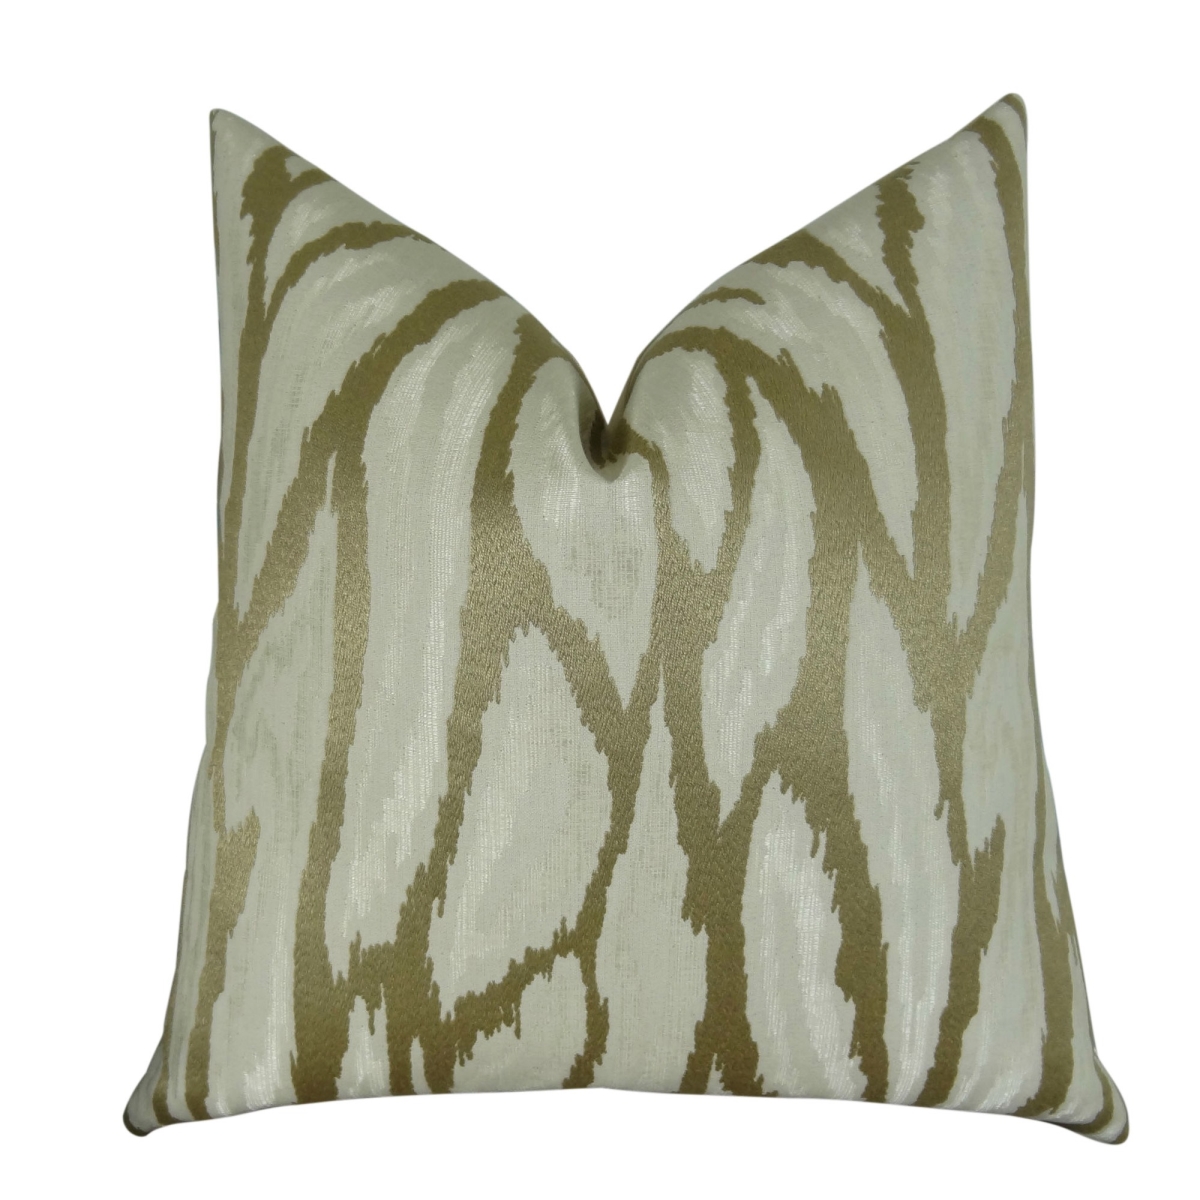 Plutus PB11392-2424-DP Convection Handmade Throw Pillow, Taupe & Ivory - 24 x 24 in.